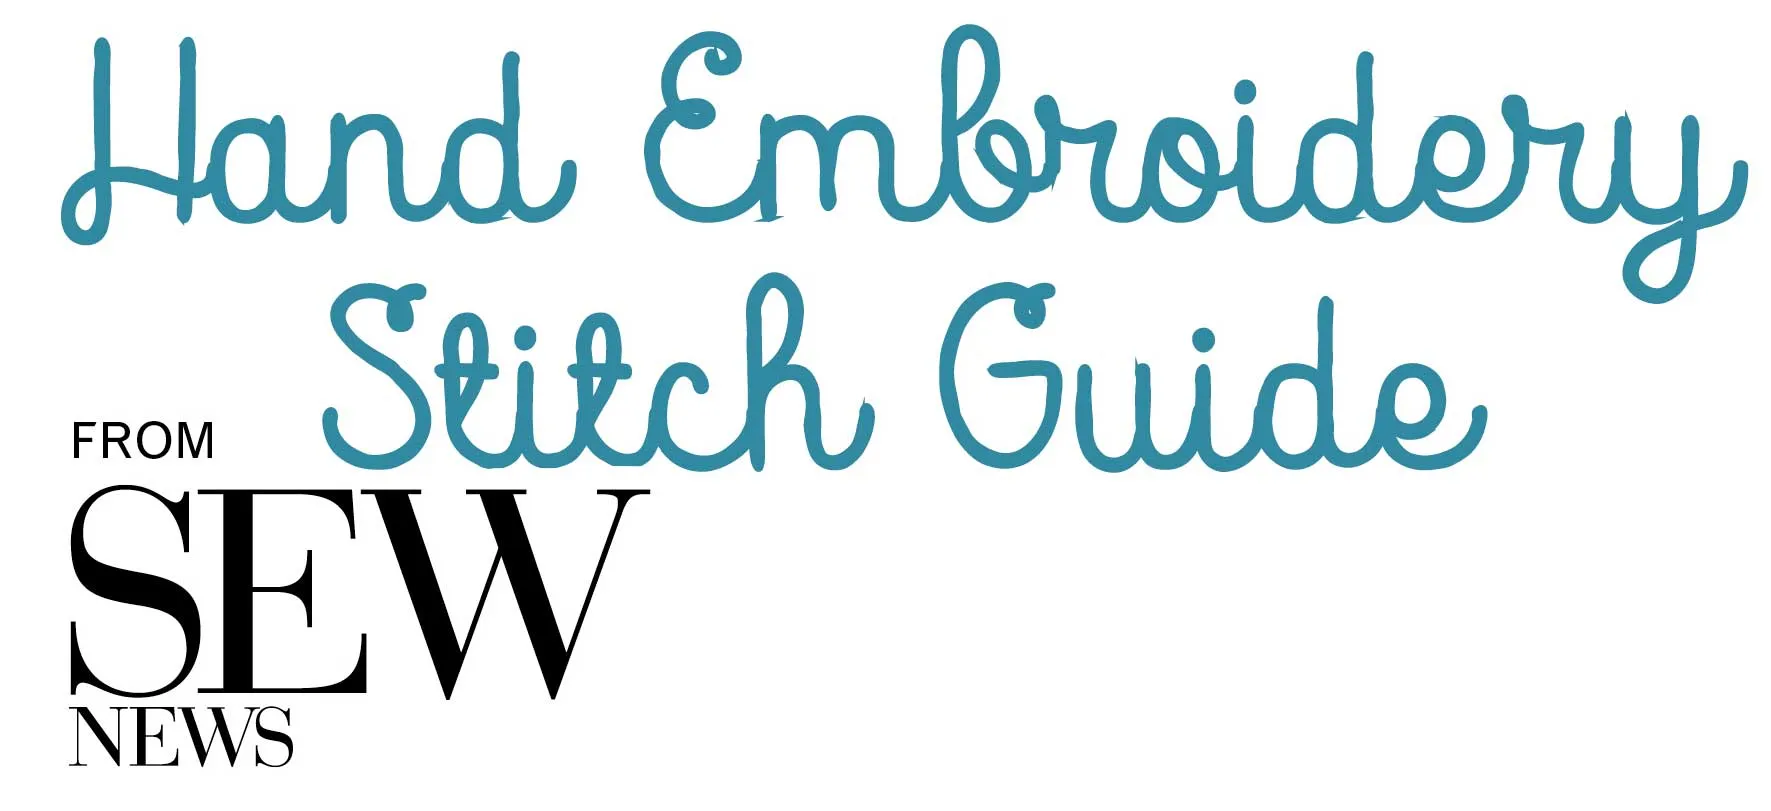 Guide To Hand Embroidery Stitches - Sew Daily